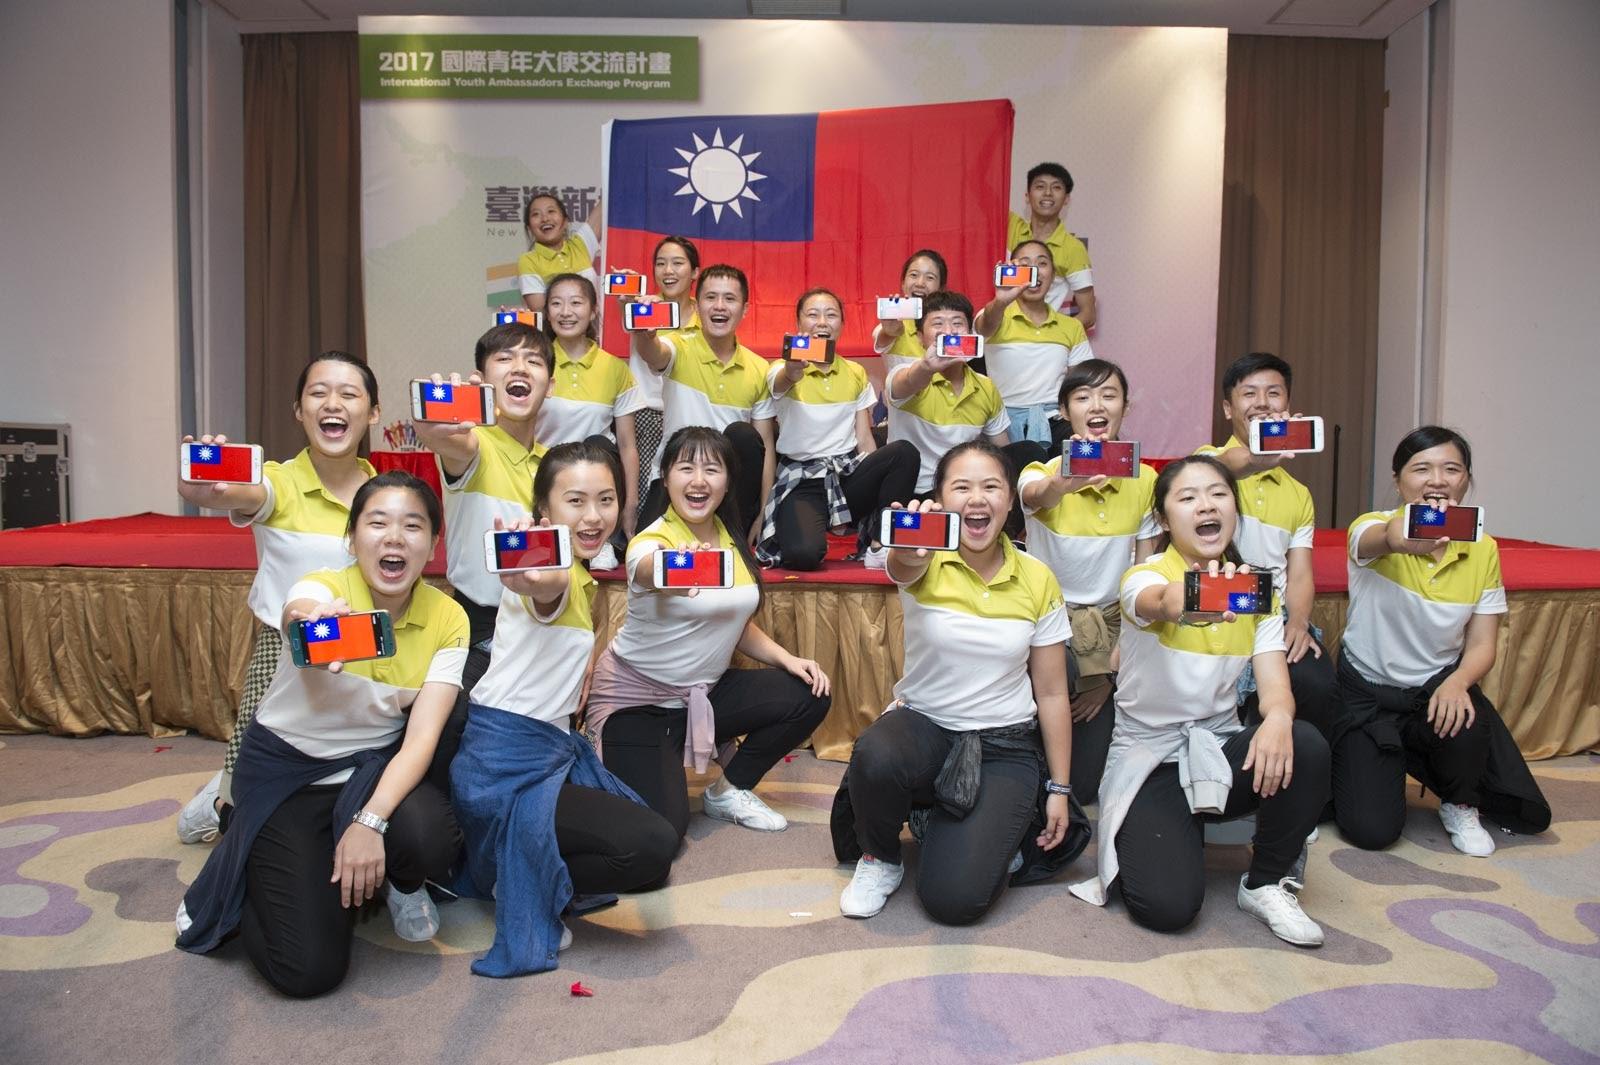 Youth Ambassadors performed in “Taiwan Culture Night” on 5th of September.